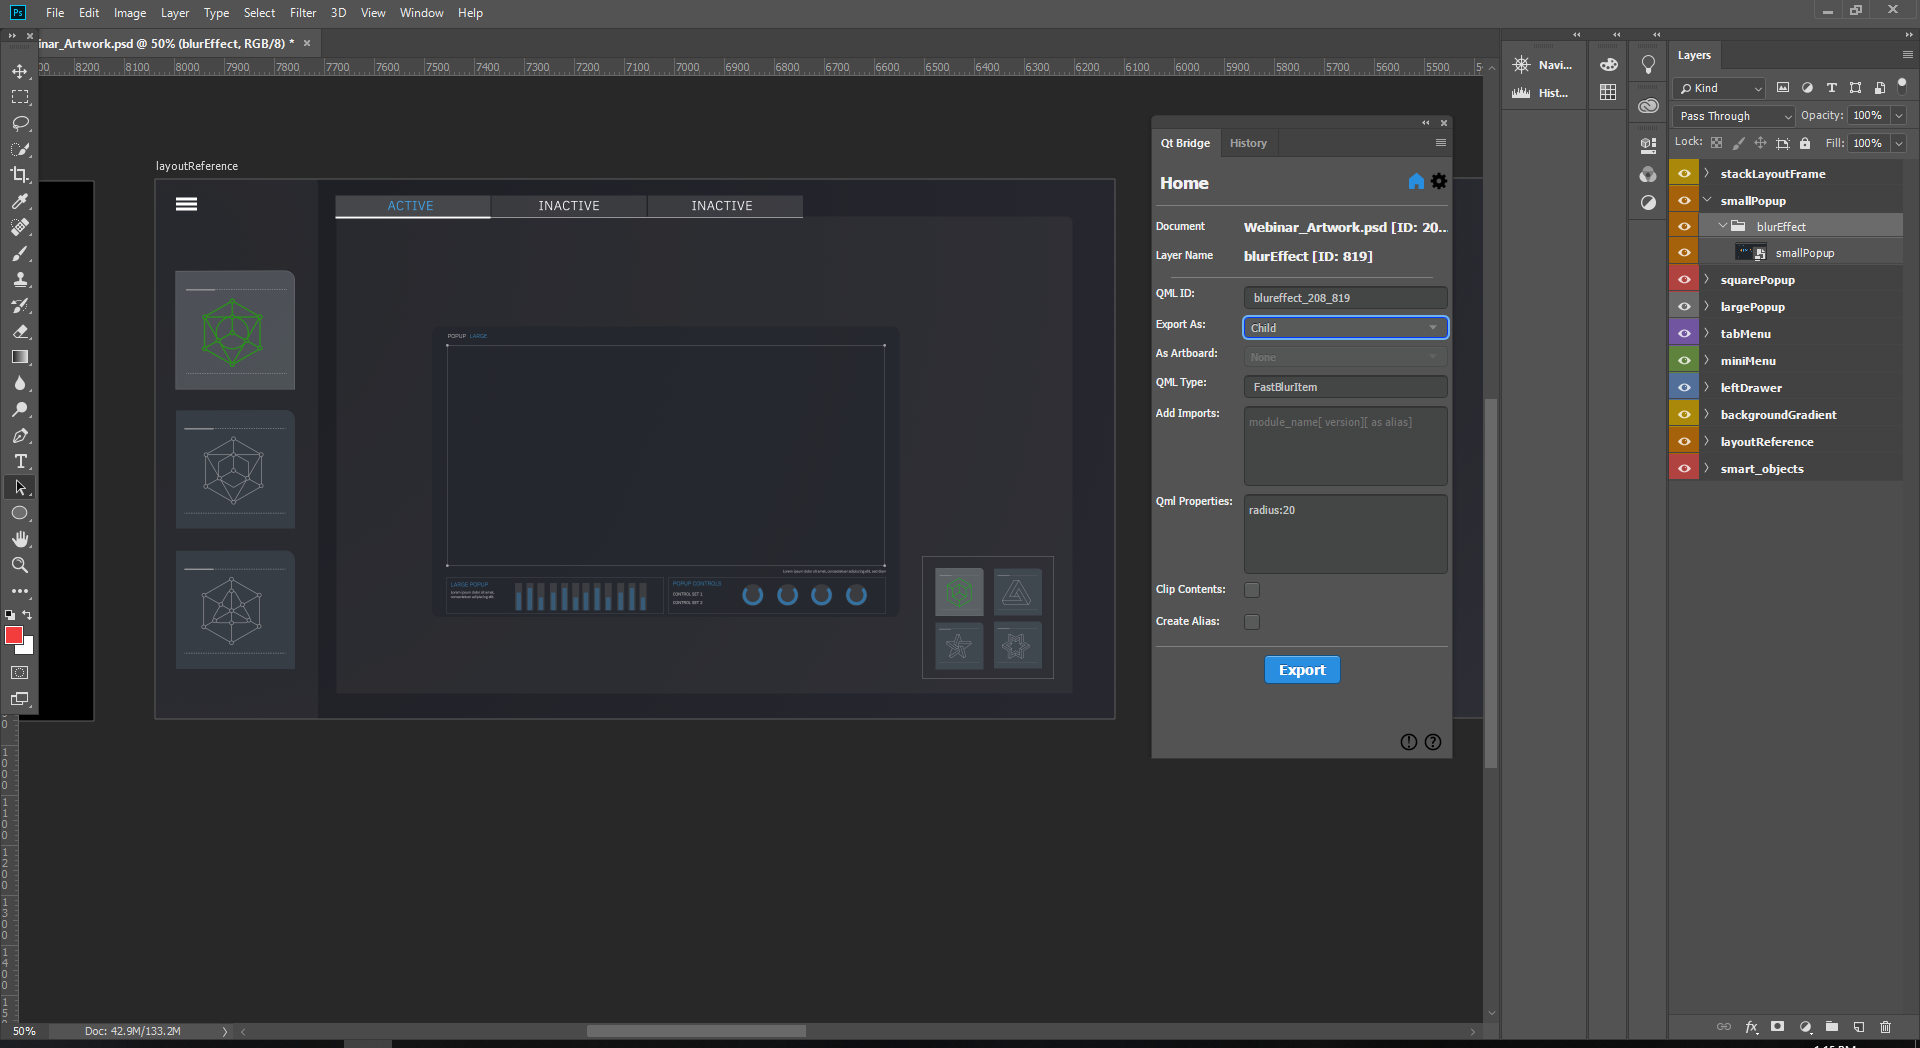 "Settings for exporting blurEffect layer"